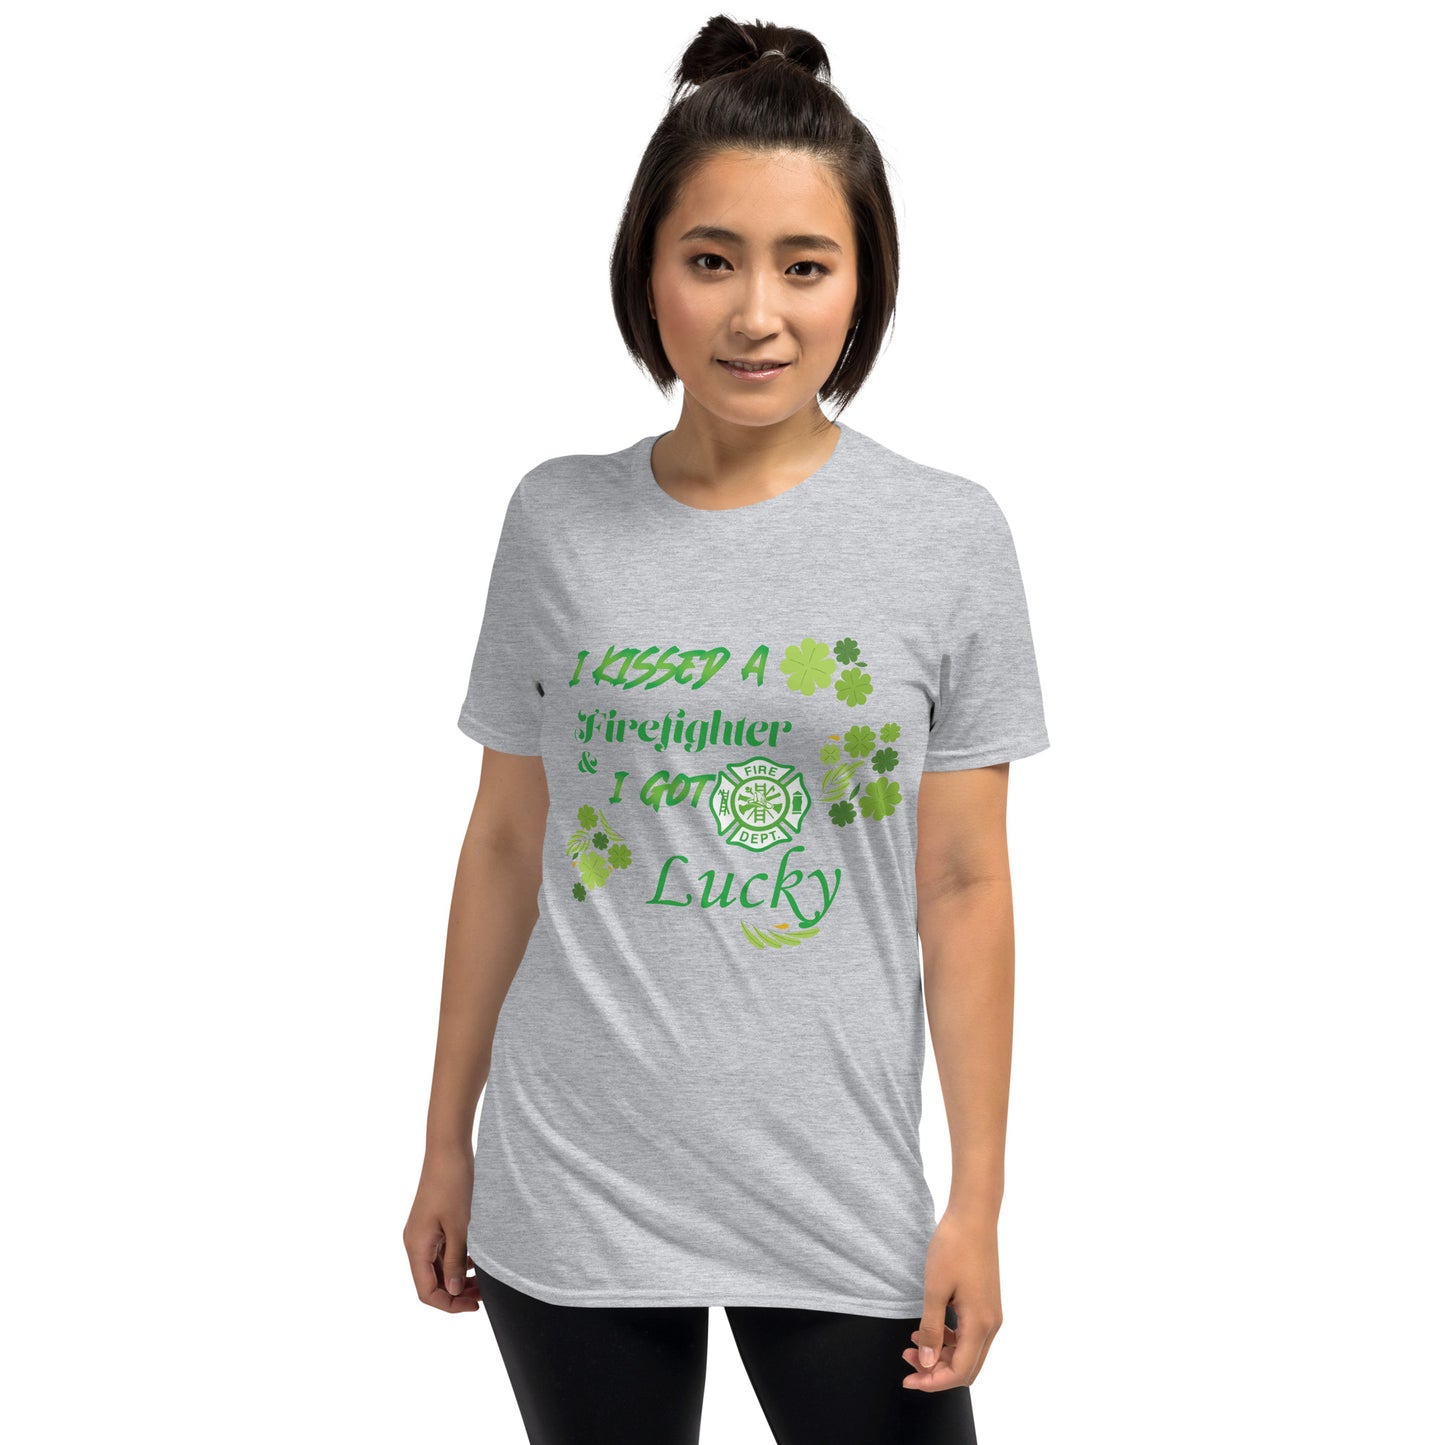 I kissed a Firefighter and Got Lucky Short-Sleeve Unisex T-Shirt